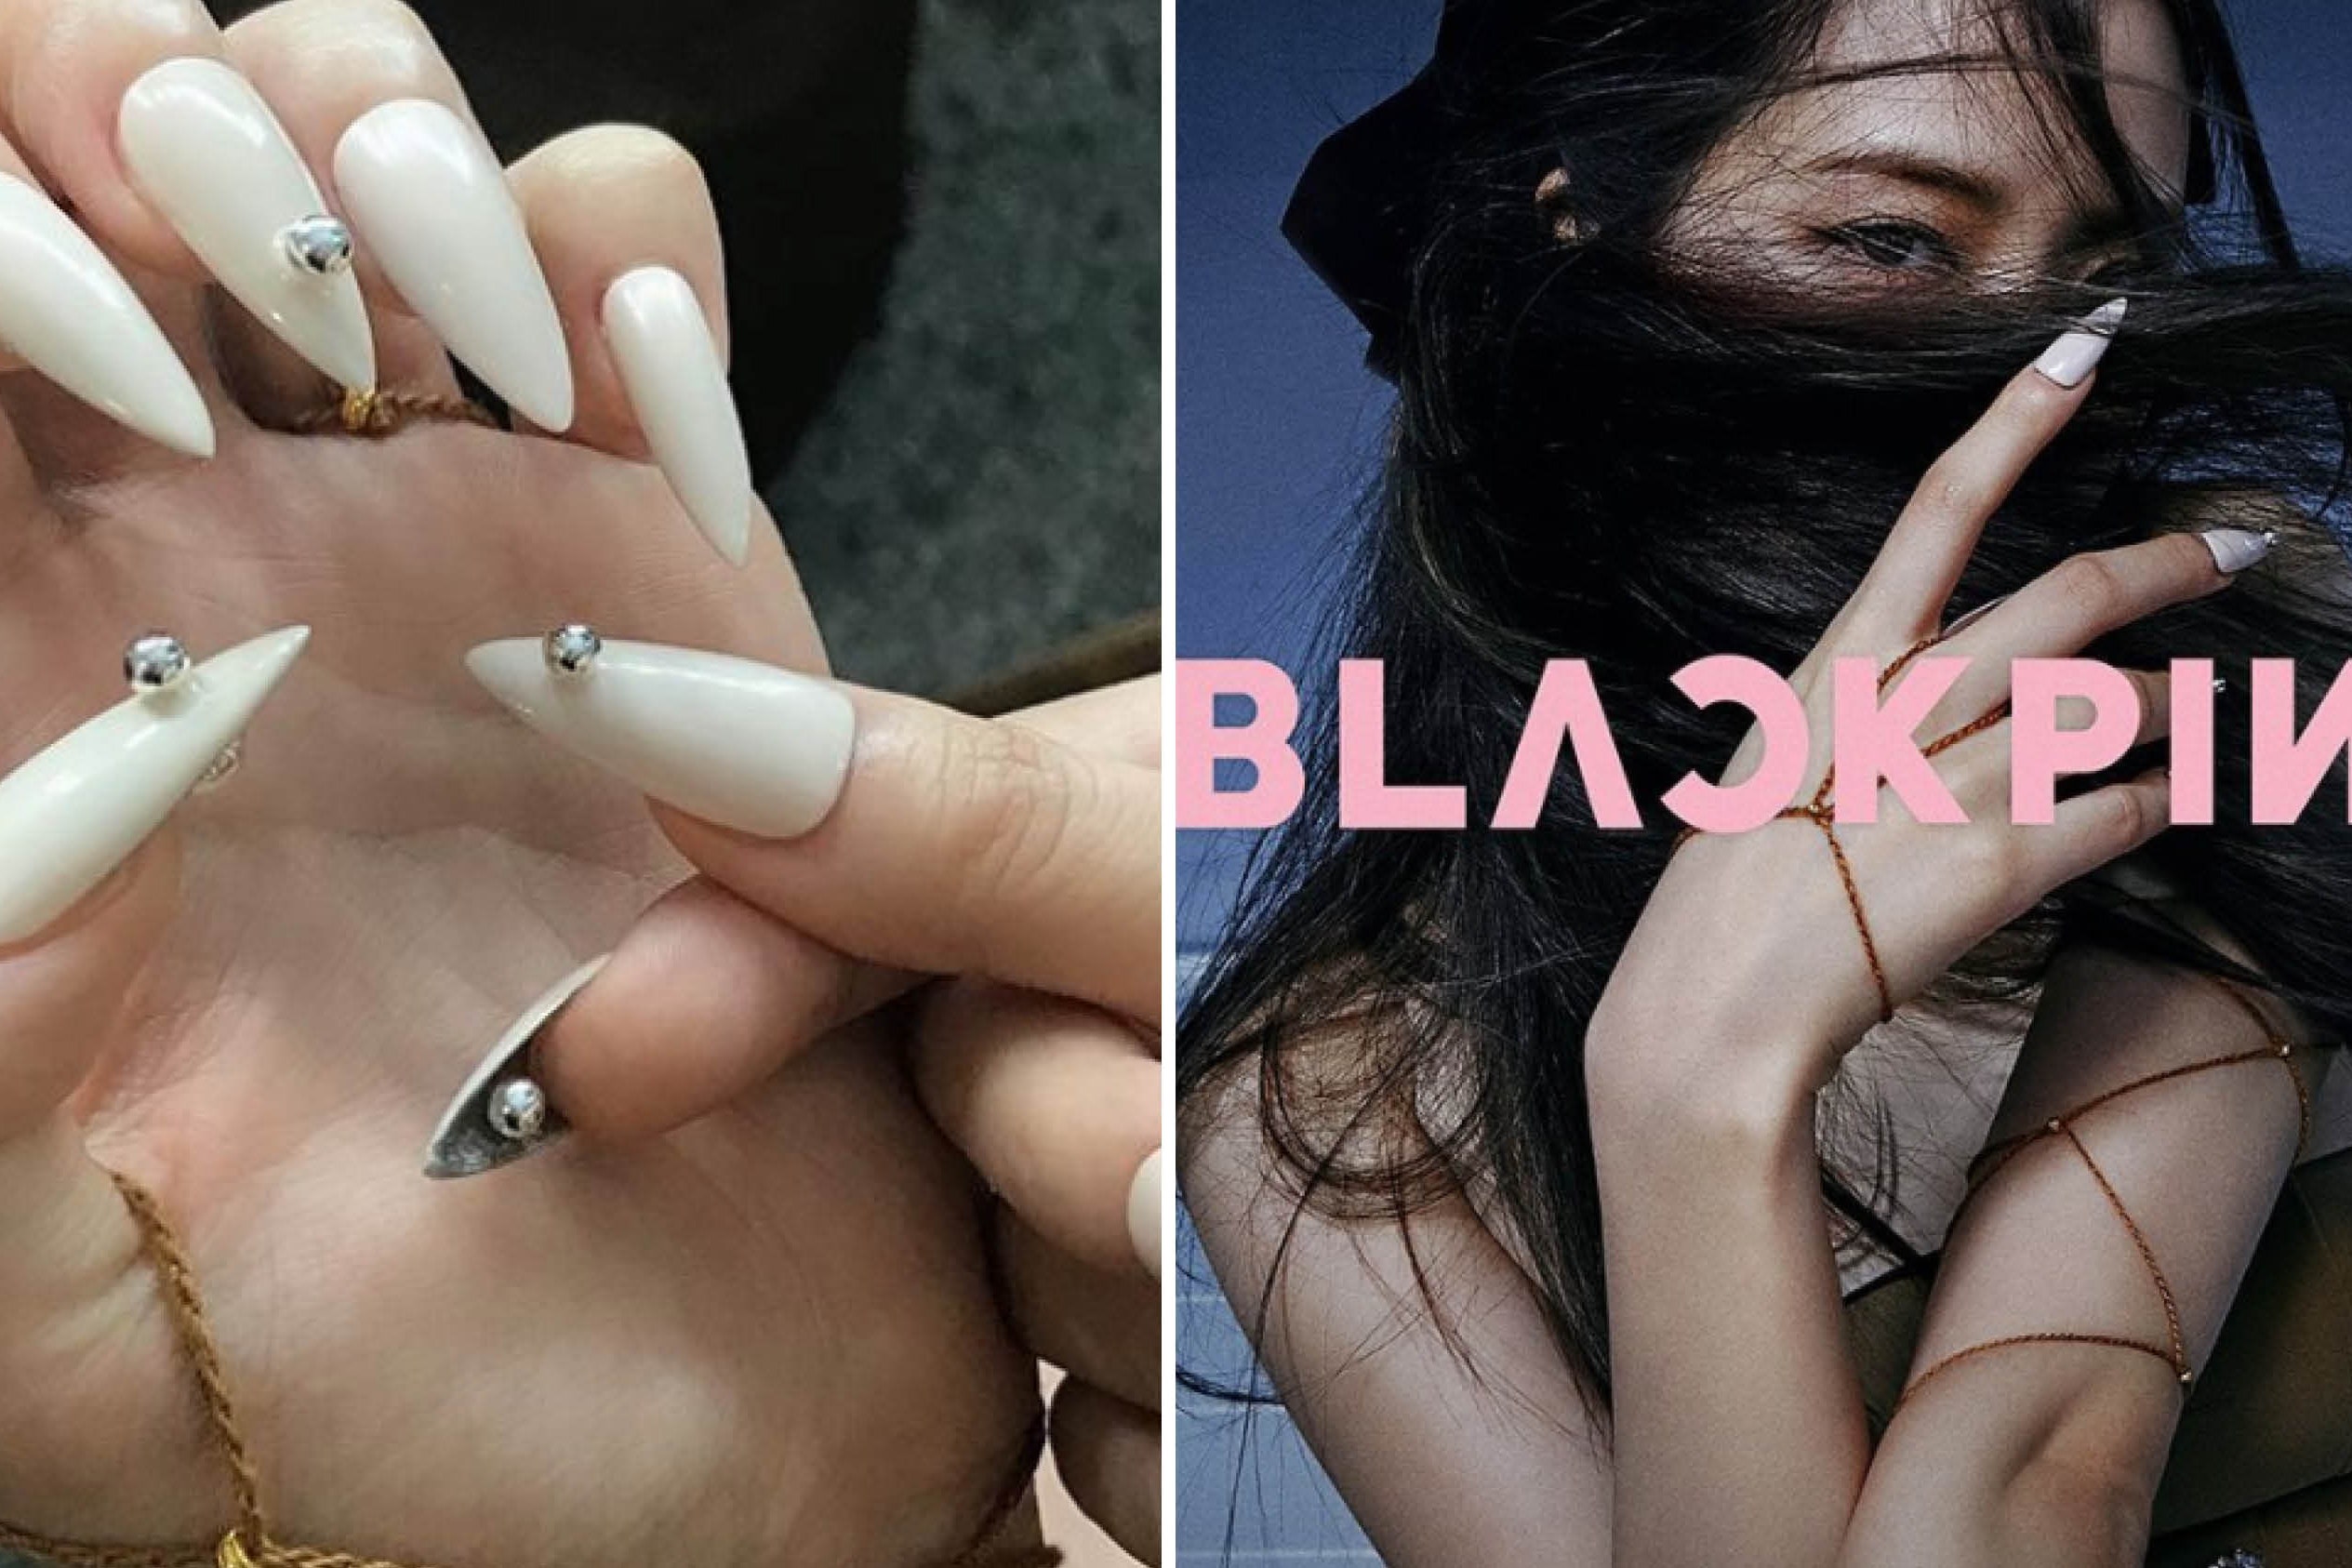 Nail models are popular in korea, according to the nail team of blackpink